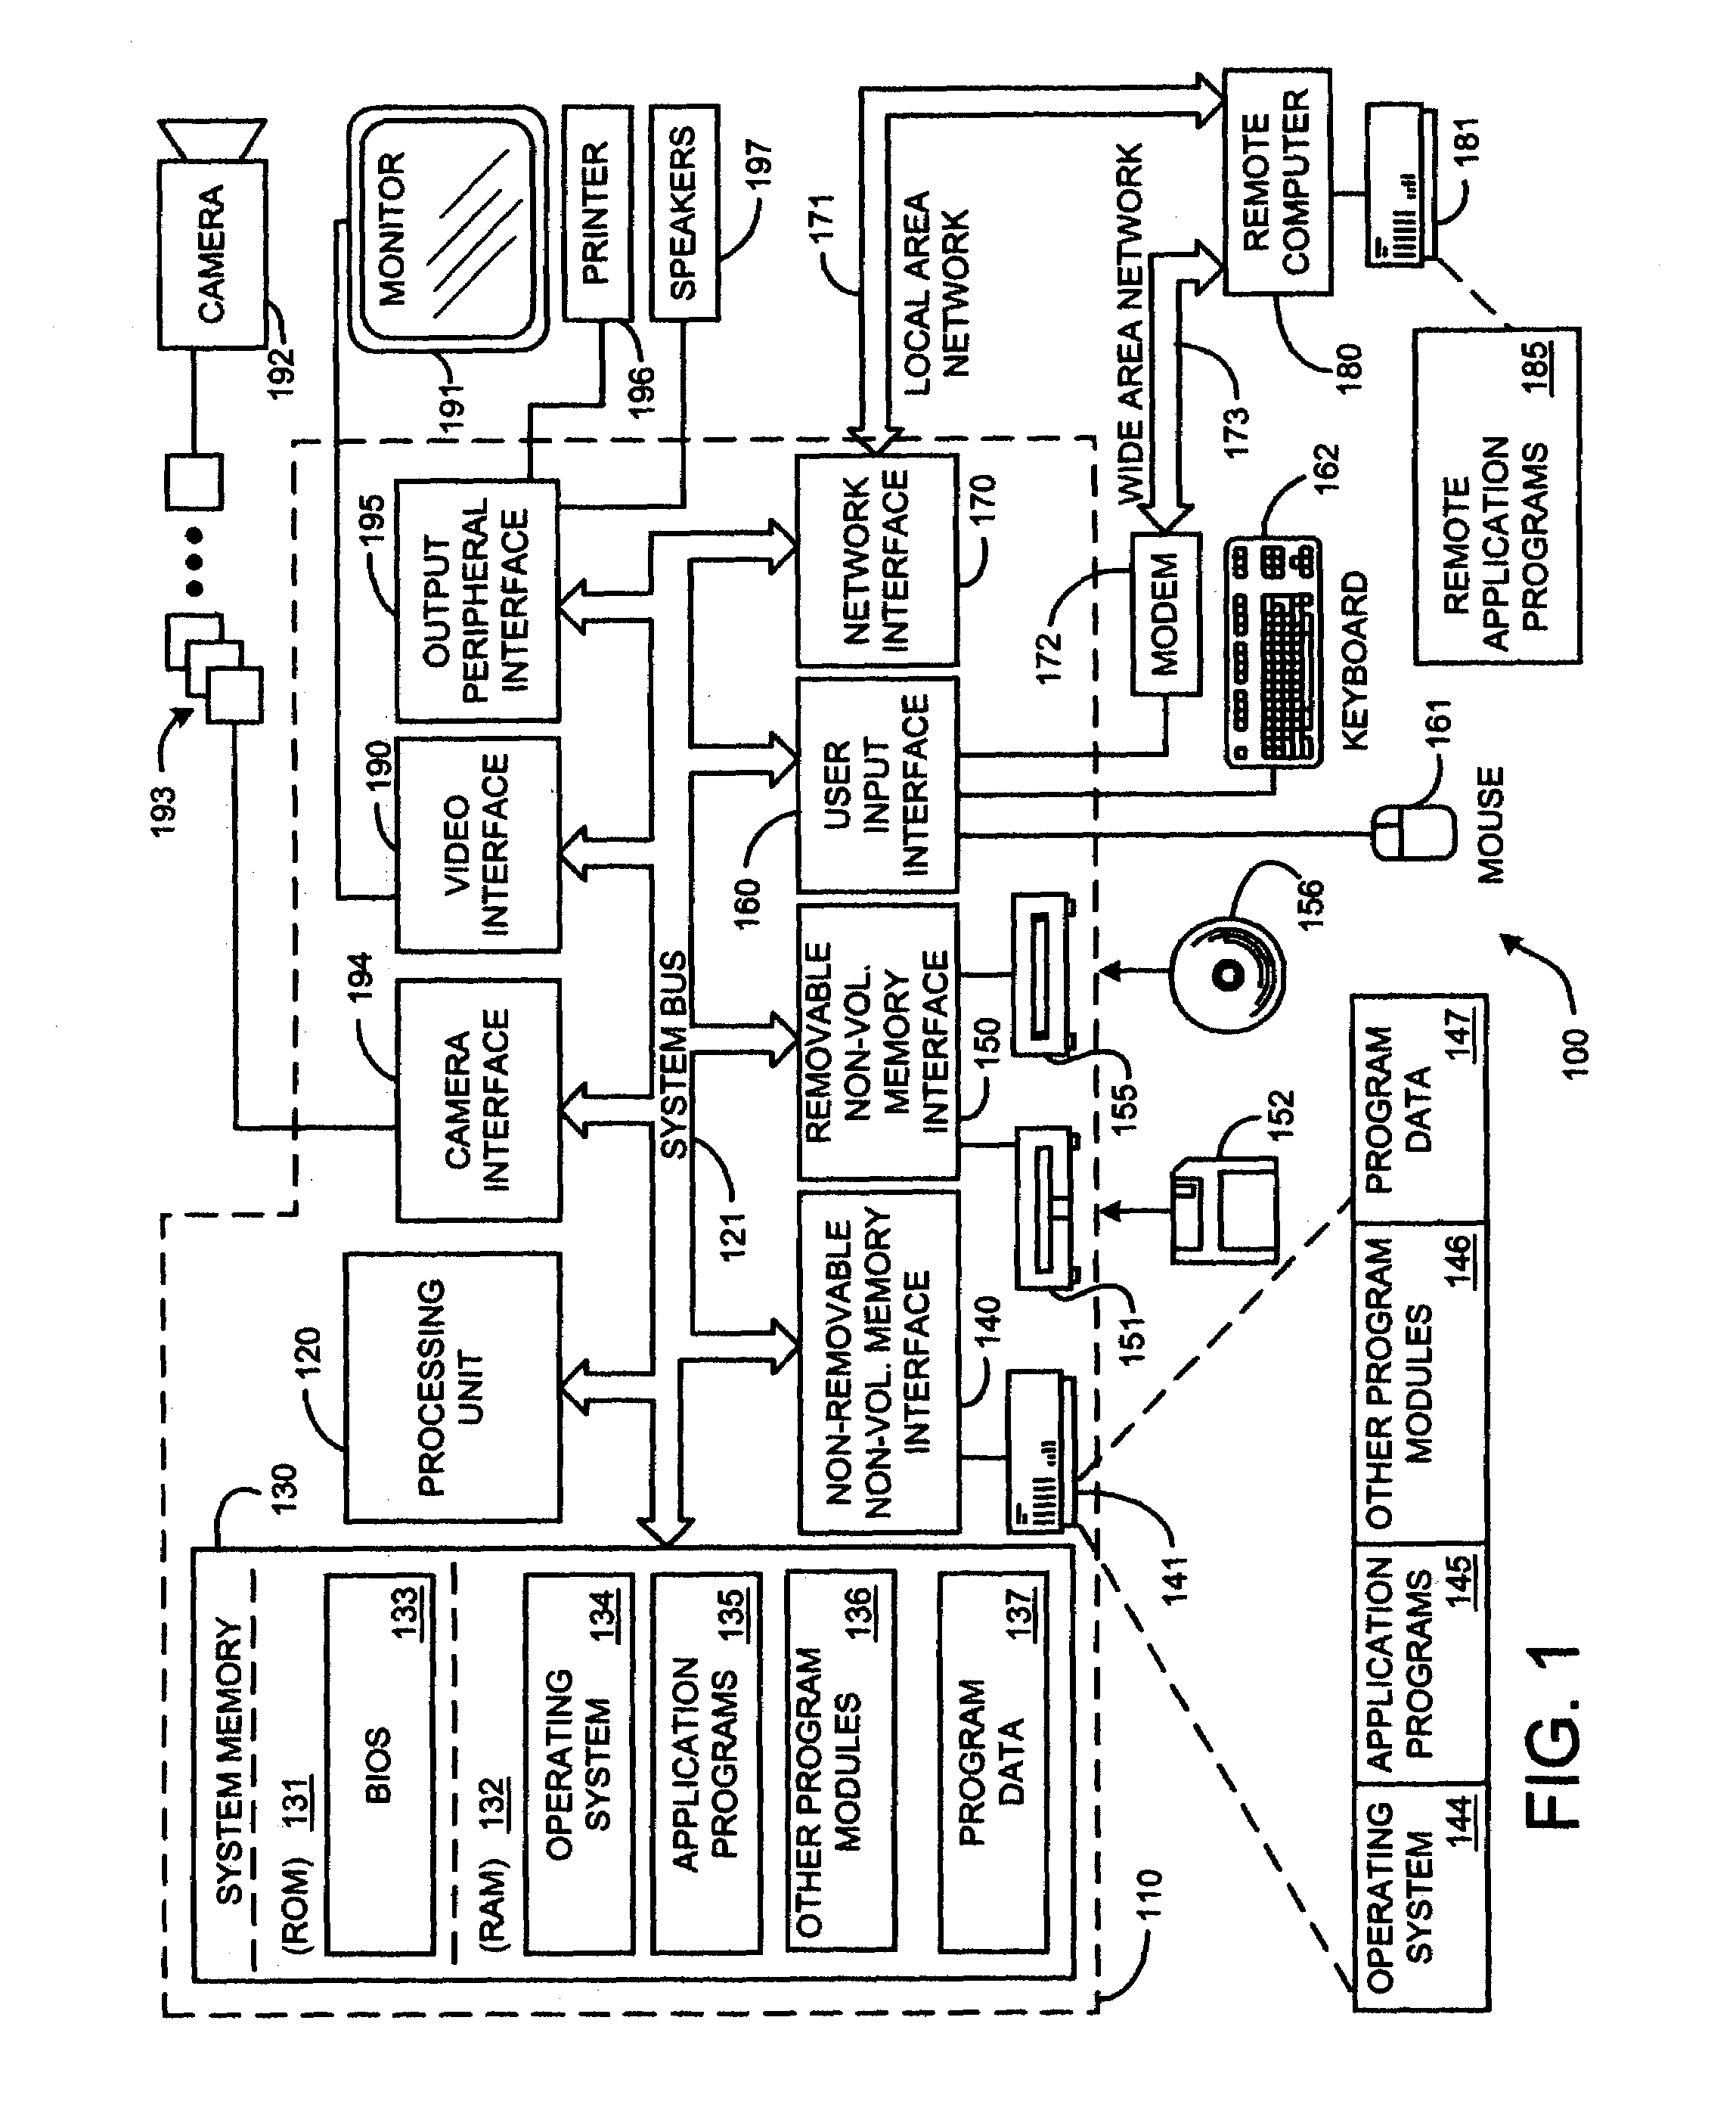 System and method for whiteboard scanning to obtain a high resolution image